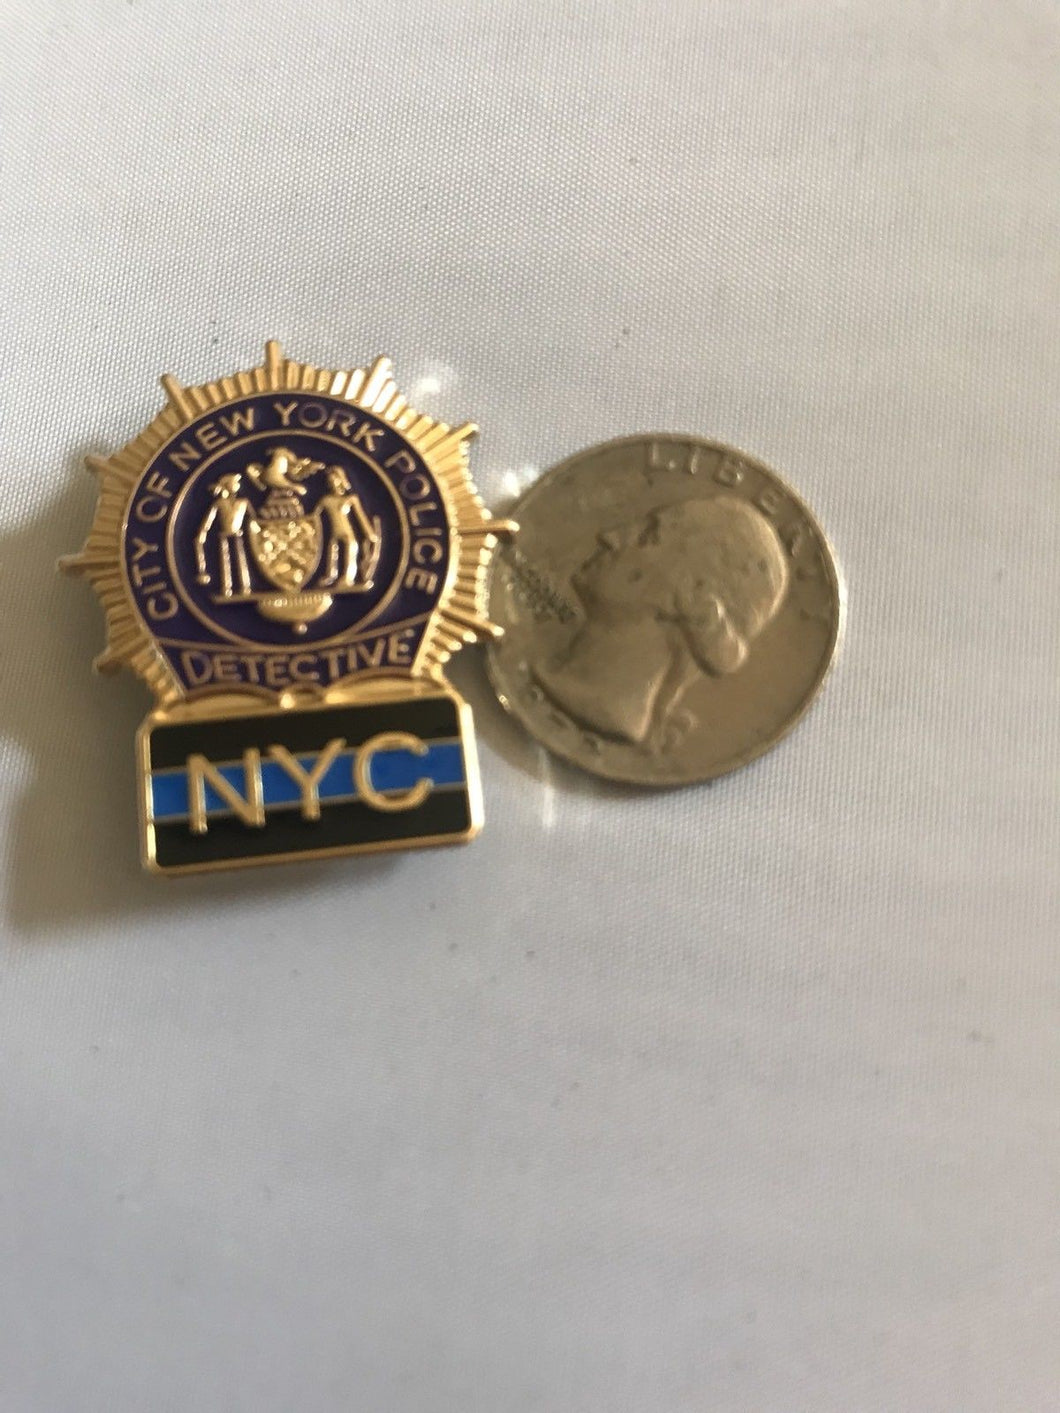 Police Officer Mini Badge Detective NYC Thin Blue Line Lapel Hat Pin Cop